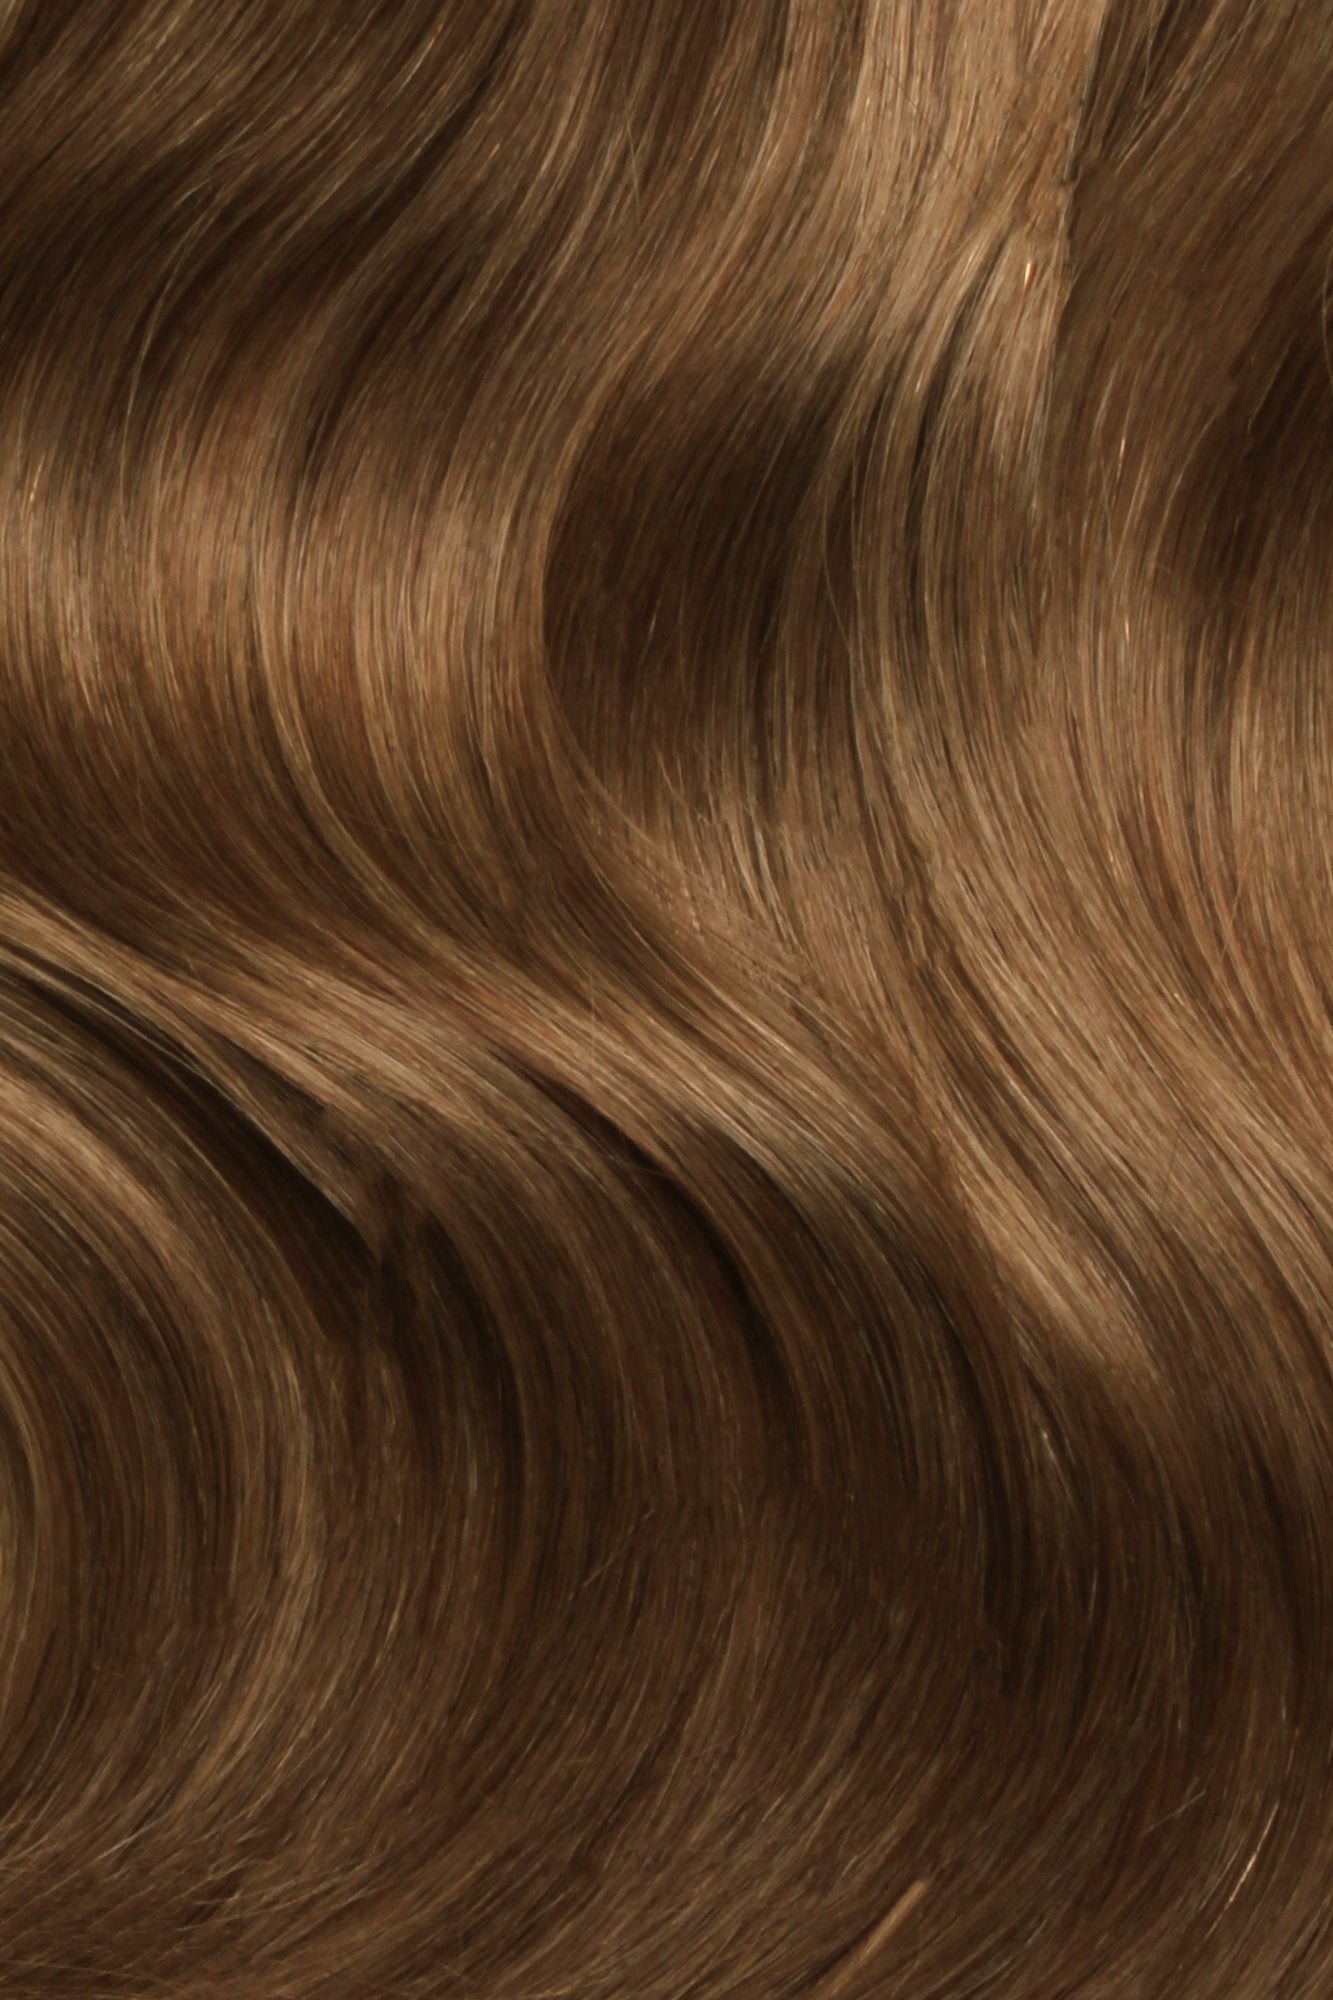 SEAMLESS® Flat Weft 24 Inches - SWAY Hair Extensions Chestnut-Brown-Mix-4-6 Natural SEAMLESS® Flat Weft 24 Inches extensions. Thin, flexible, and discreet. 100% Double Drawn Remy Human Hair. Versatile and reusable